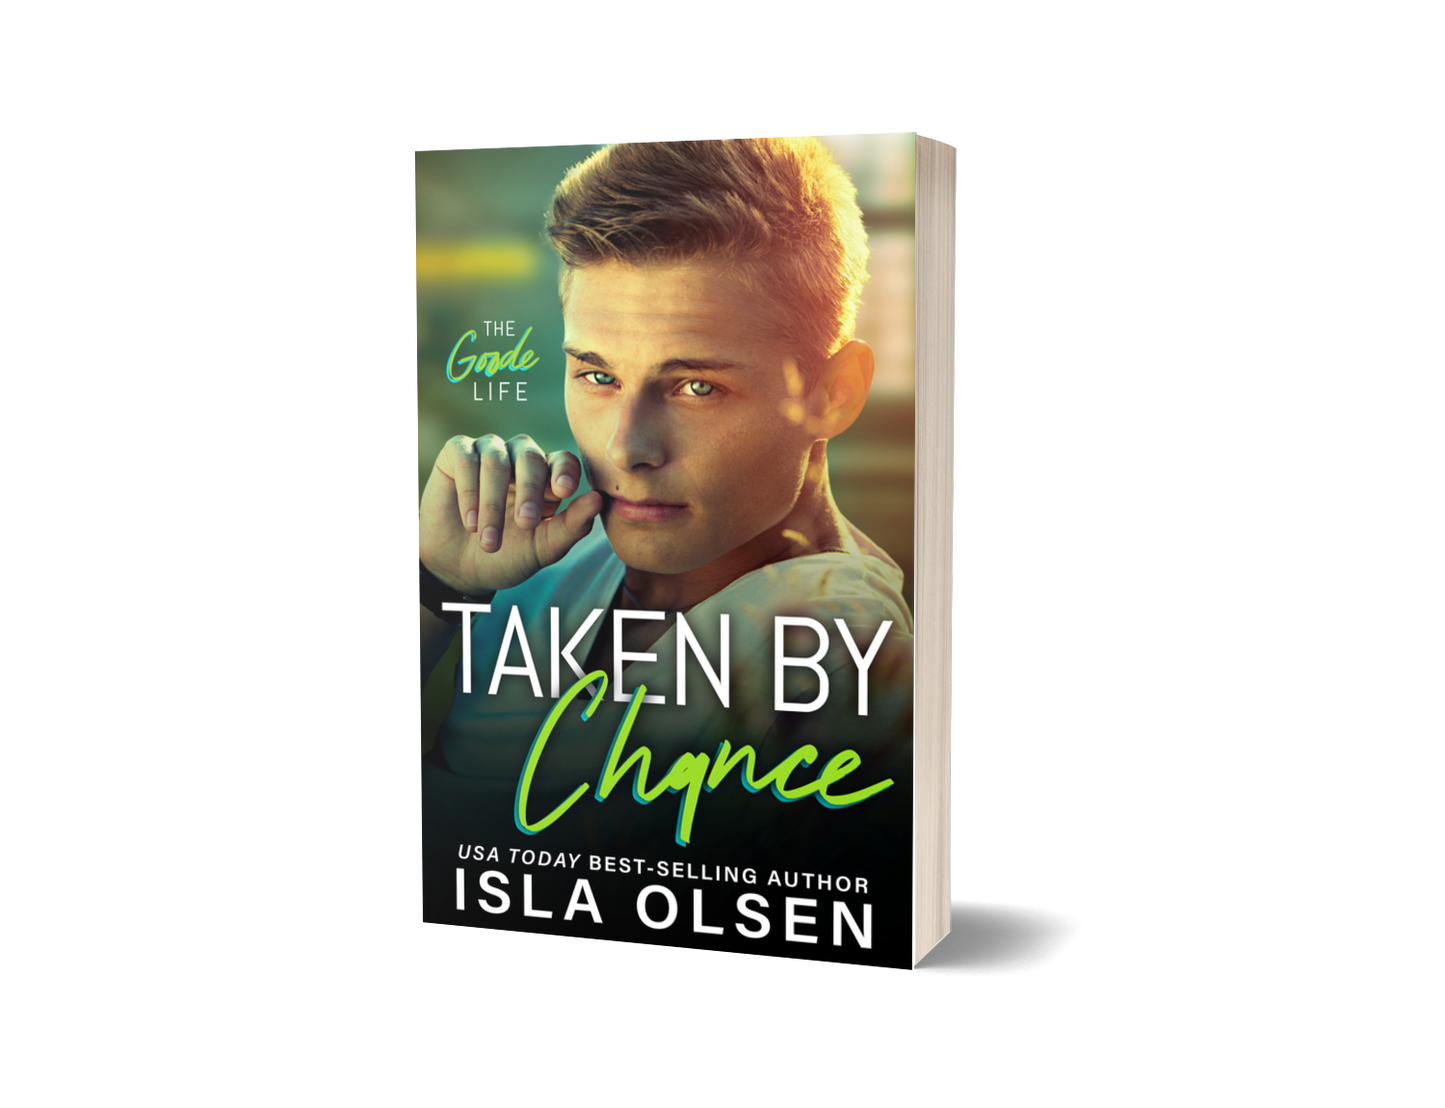 Taken by Chance: The Goode Life Book 4